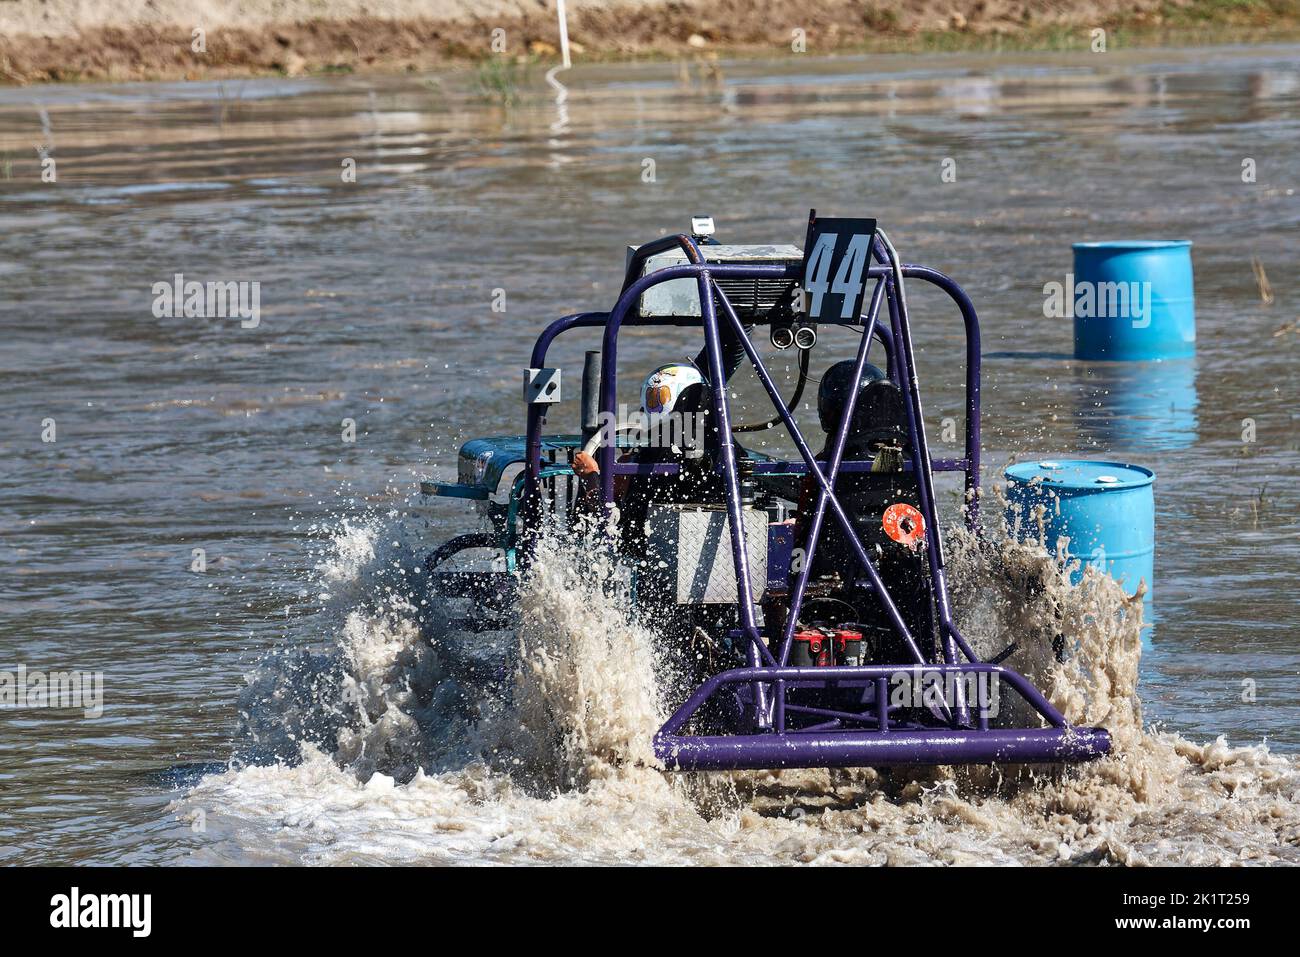 swamp buggy moving through water; action; water splashing; jeep style; vehicle sport; close-up; rear view; going around barrels; Florida Sports Park; Stock Photo